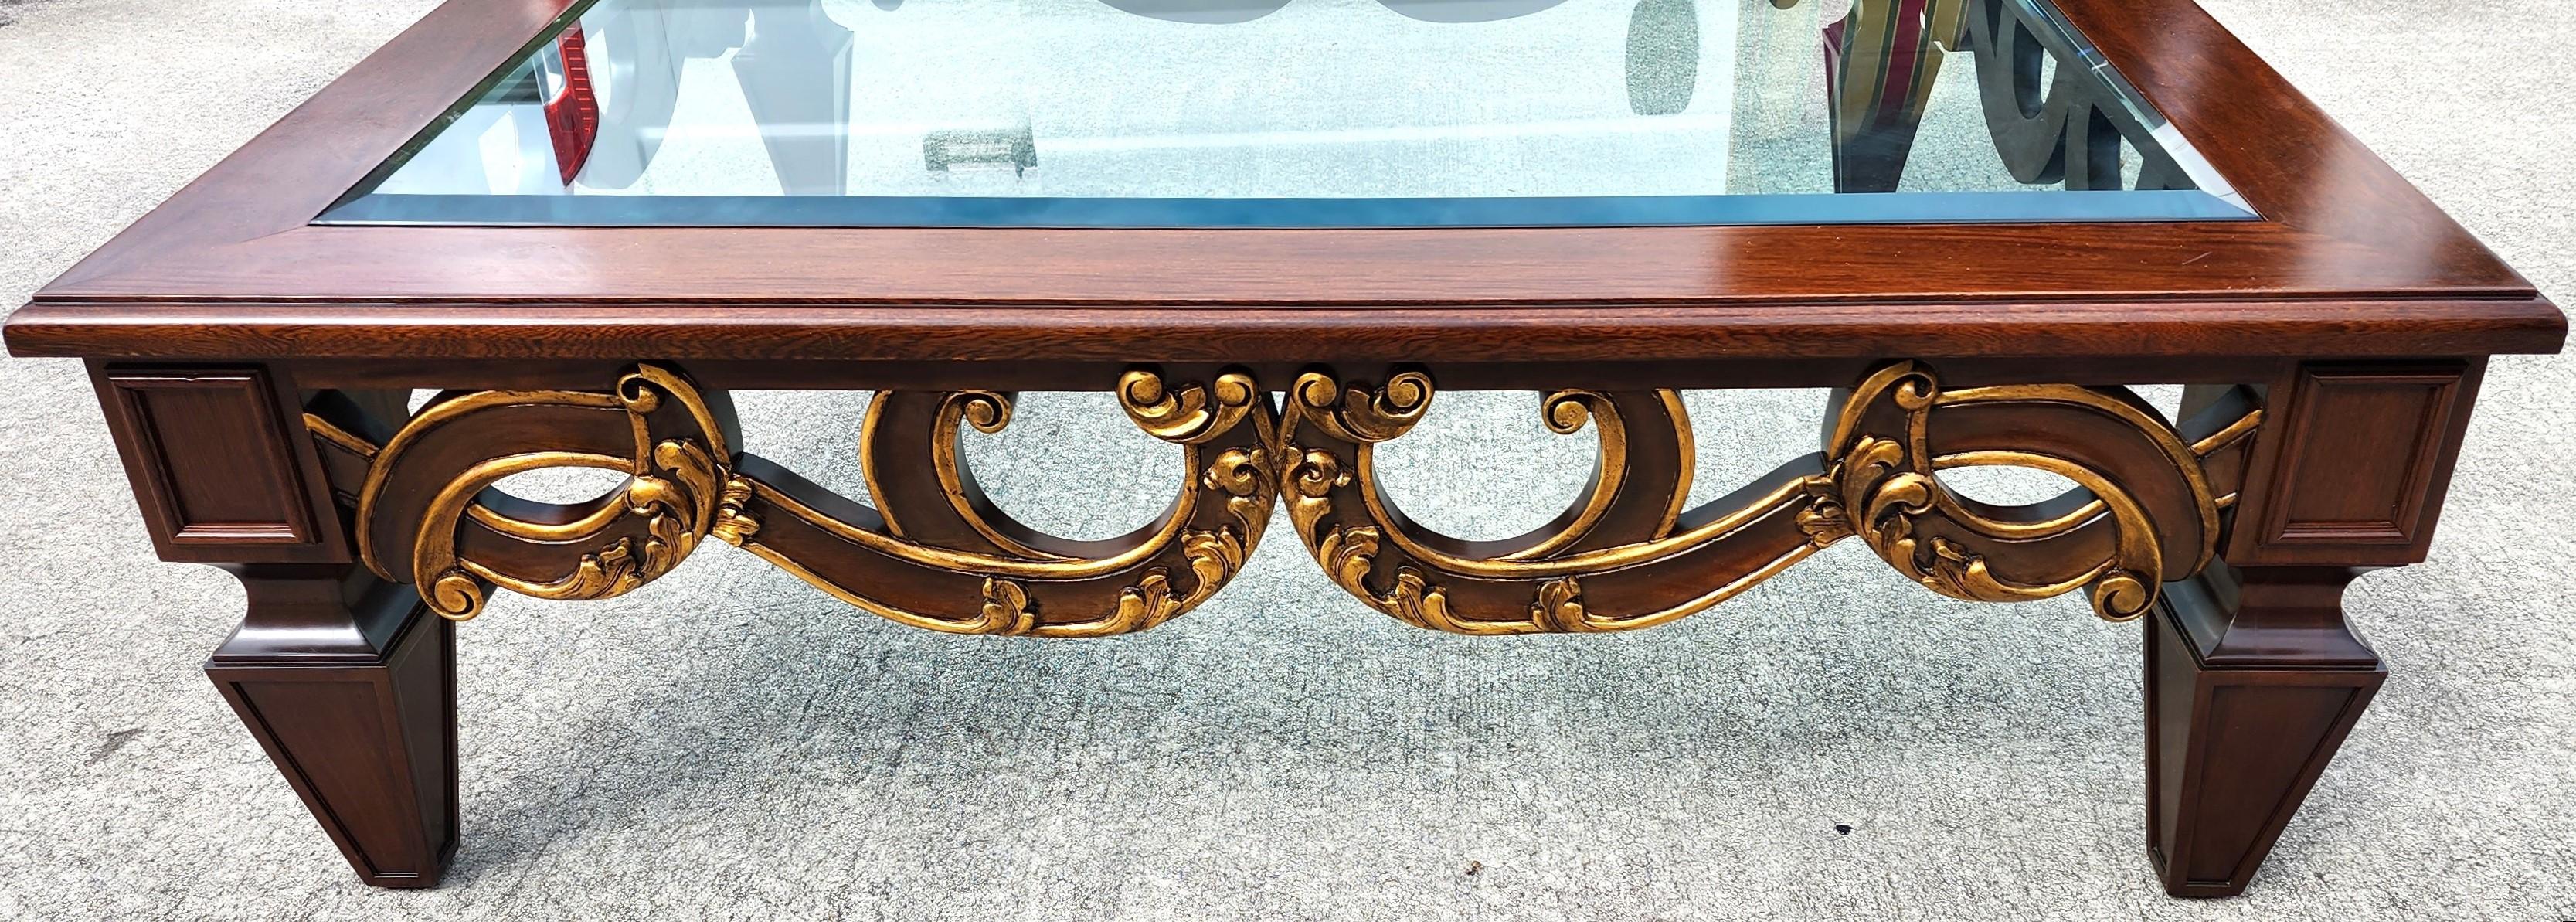 Vintage French Provincial Coffee Table Huge 5 Foot For Sale 7